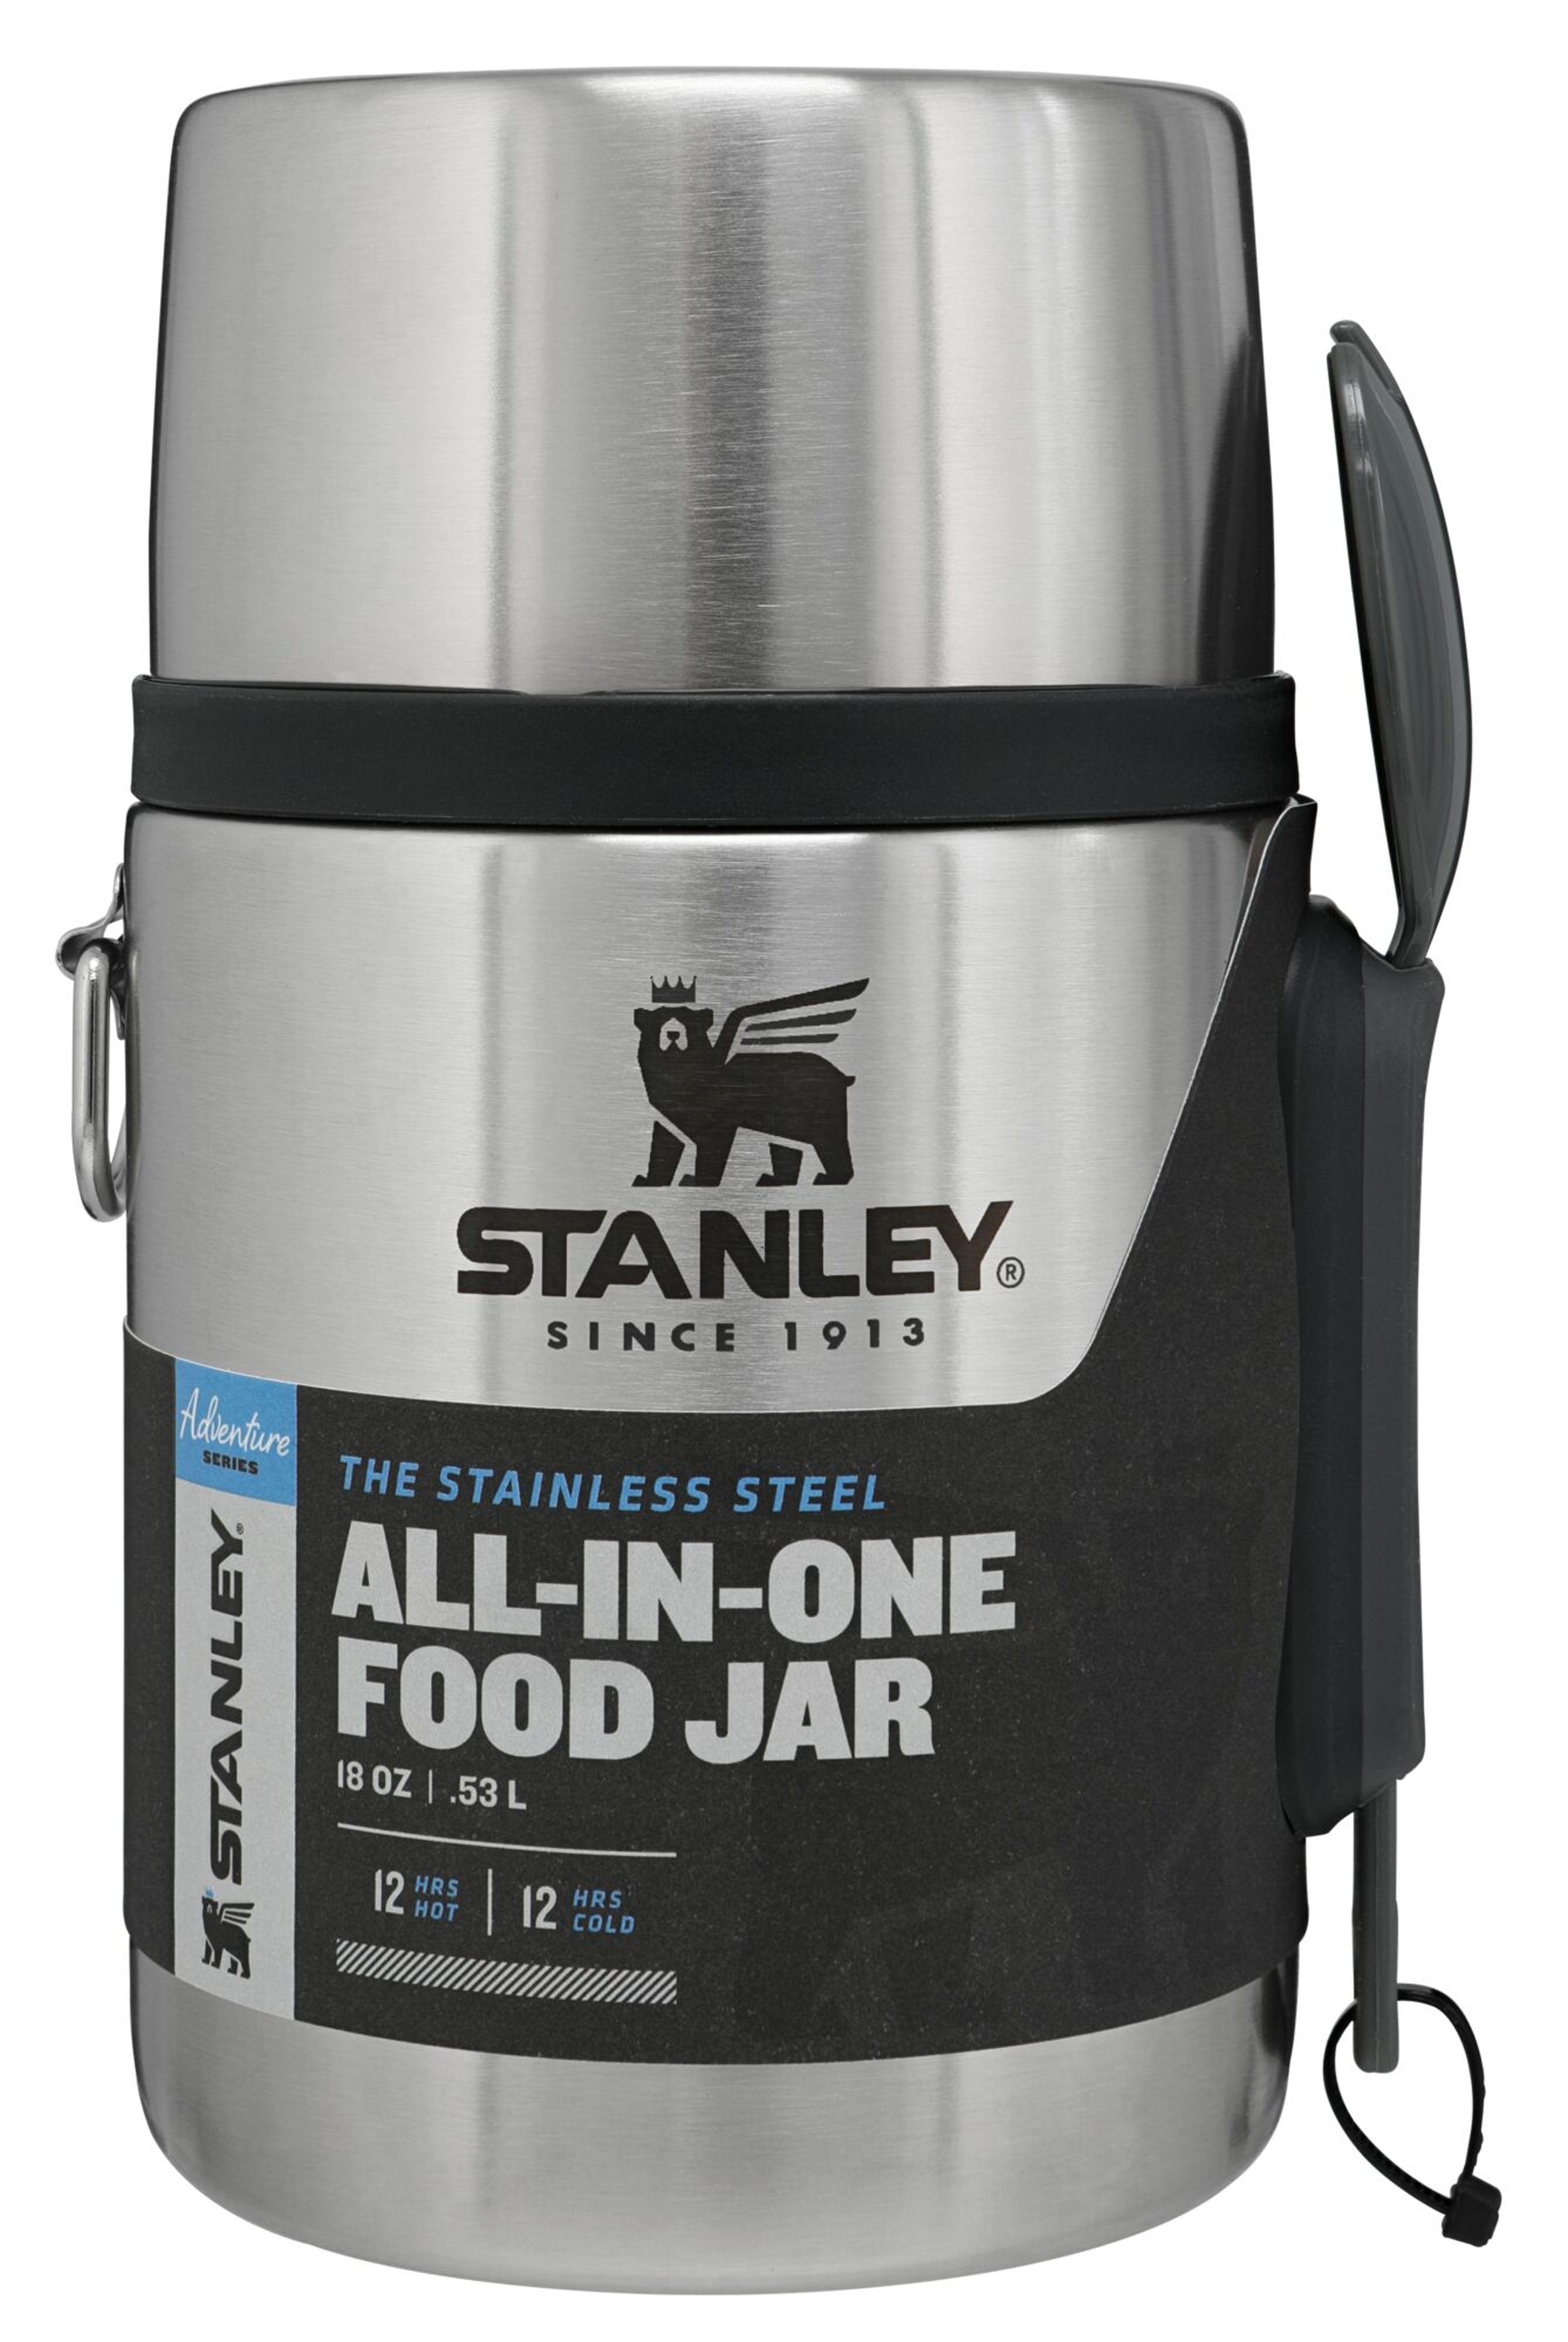 Stainless Steel All in one Food Jar 18 ounces : The Hiker Box